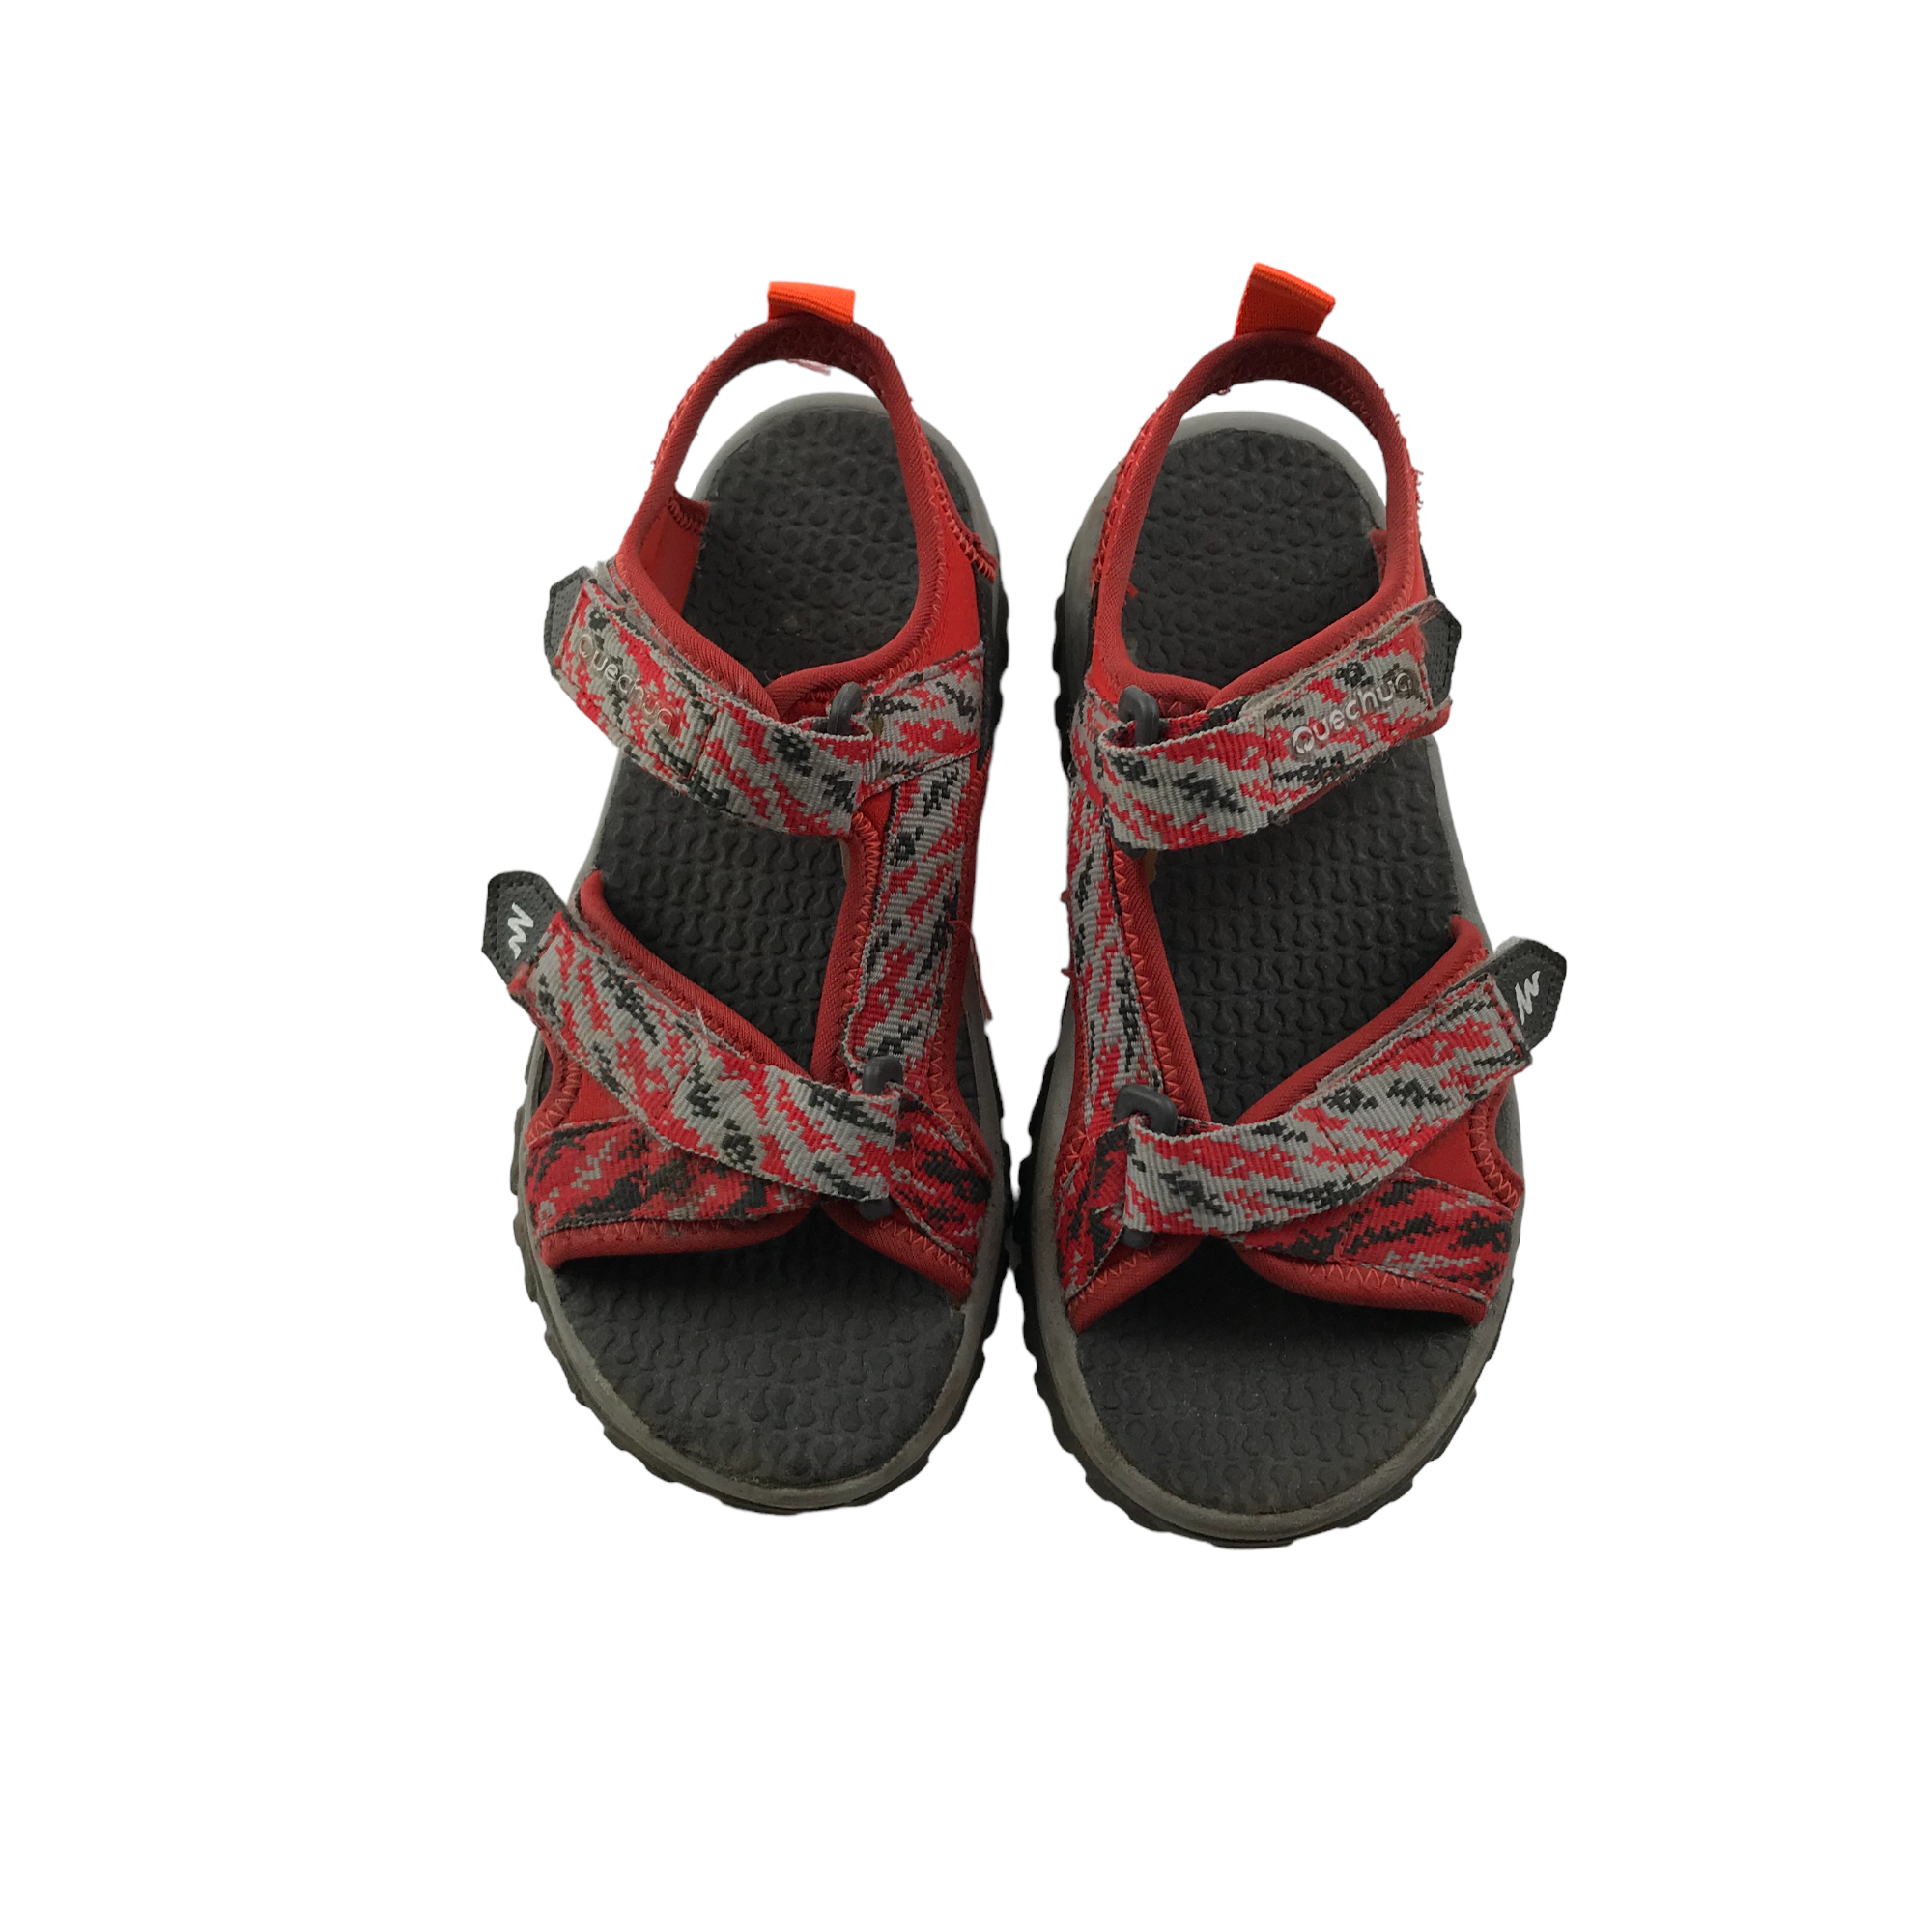 Decathlon Sports India - Malad - Our designers have developed these NH110  sandals for your occasional hikes on walking trails in hot and dry weather.  These water resistant sandals are a MUST